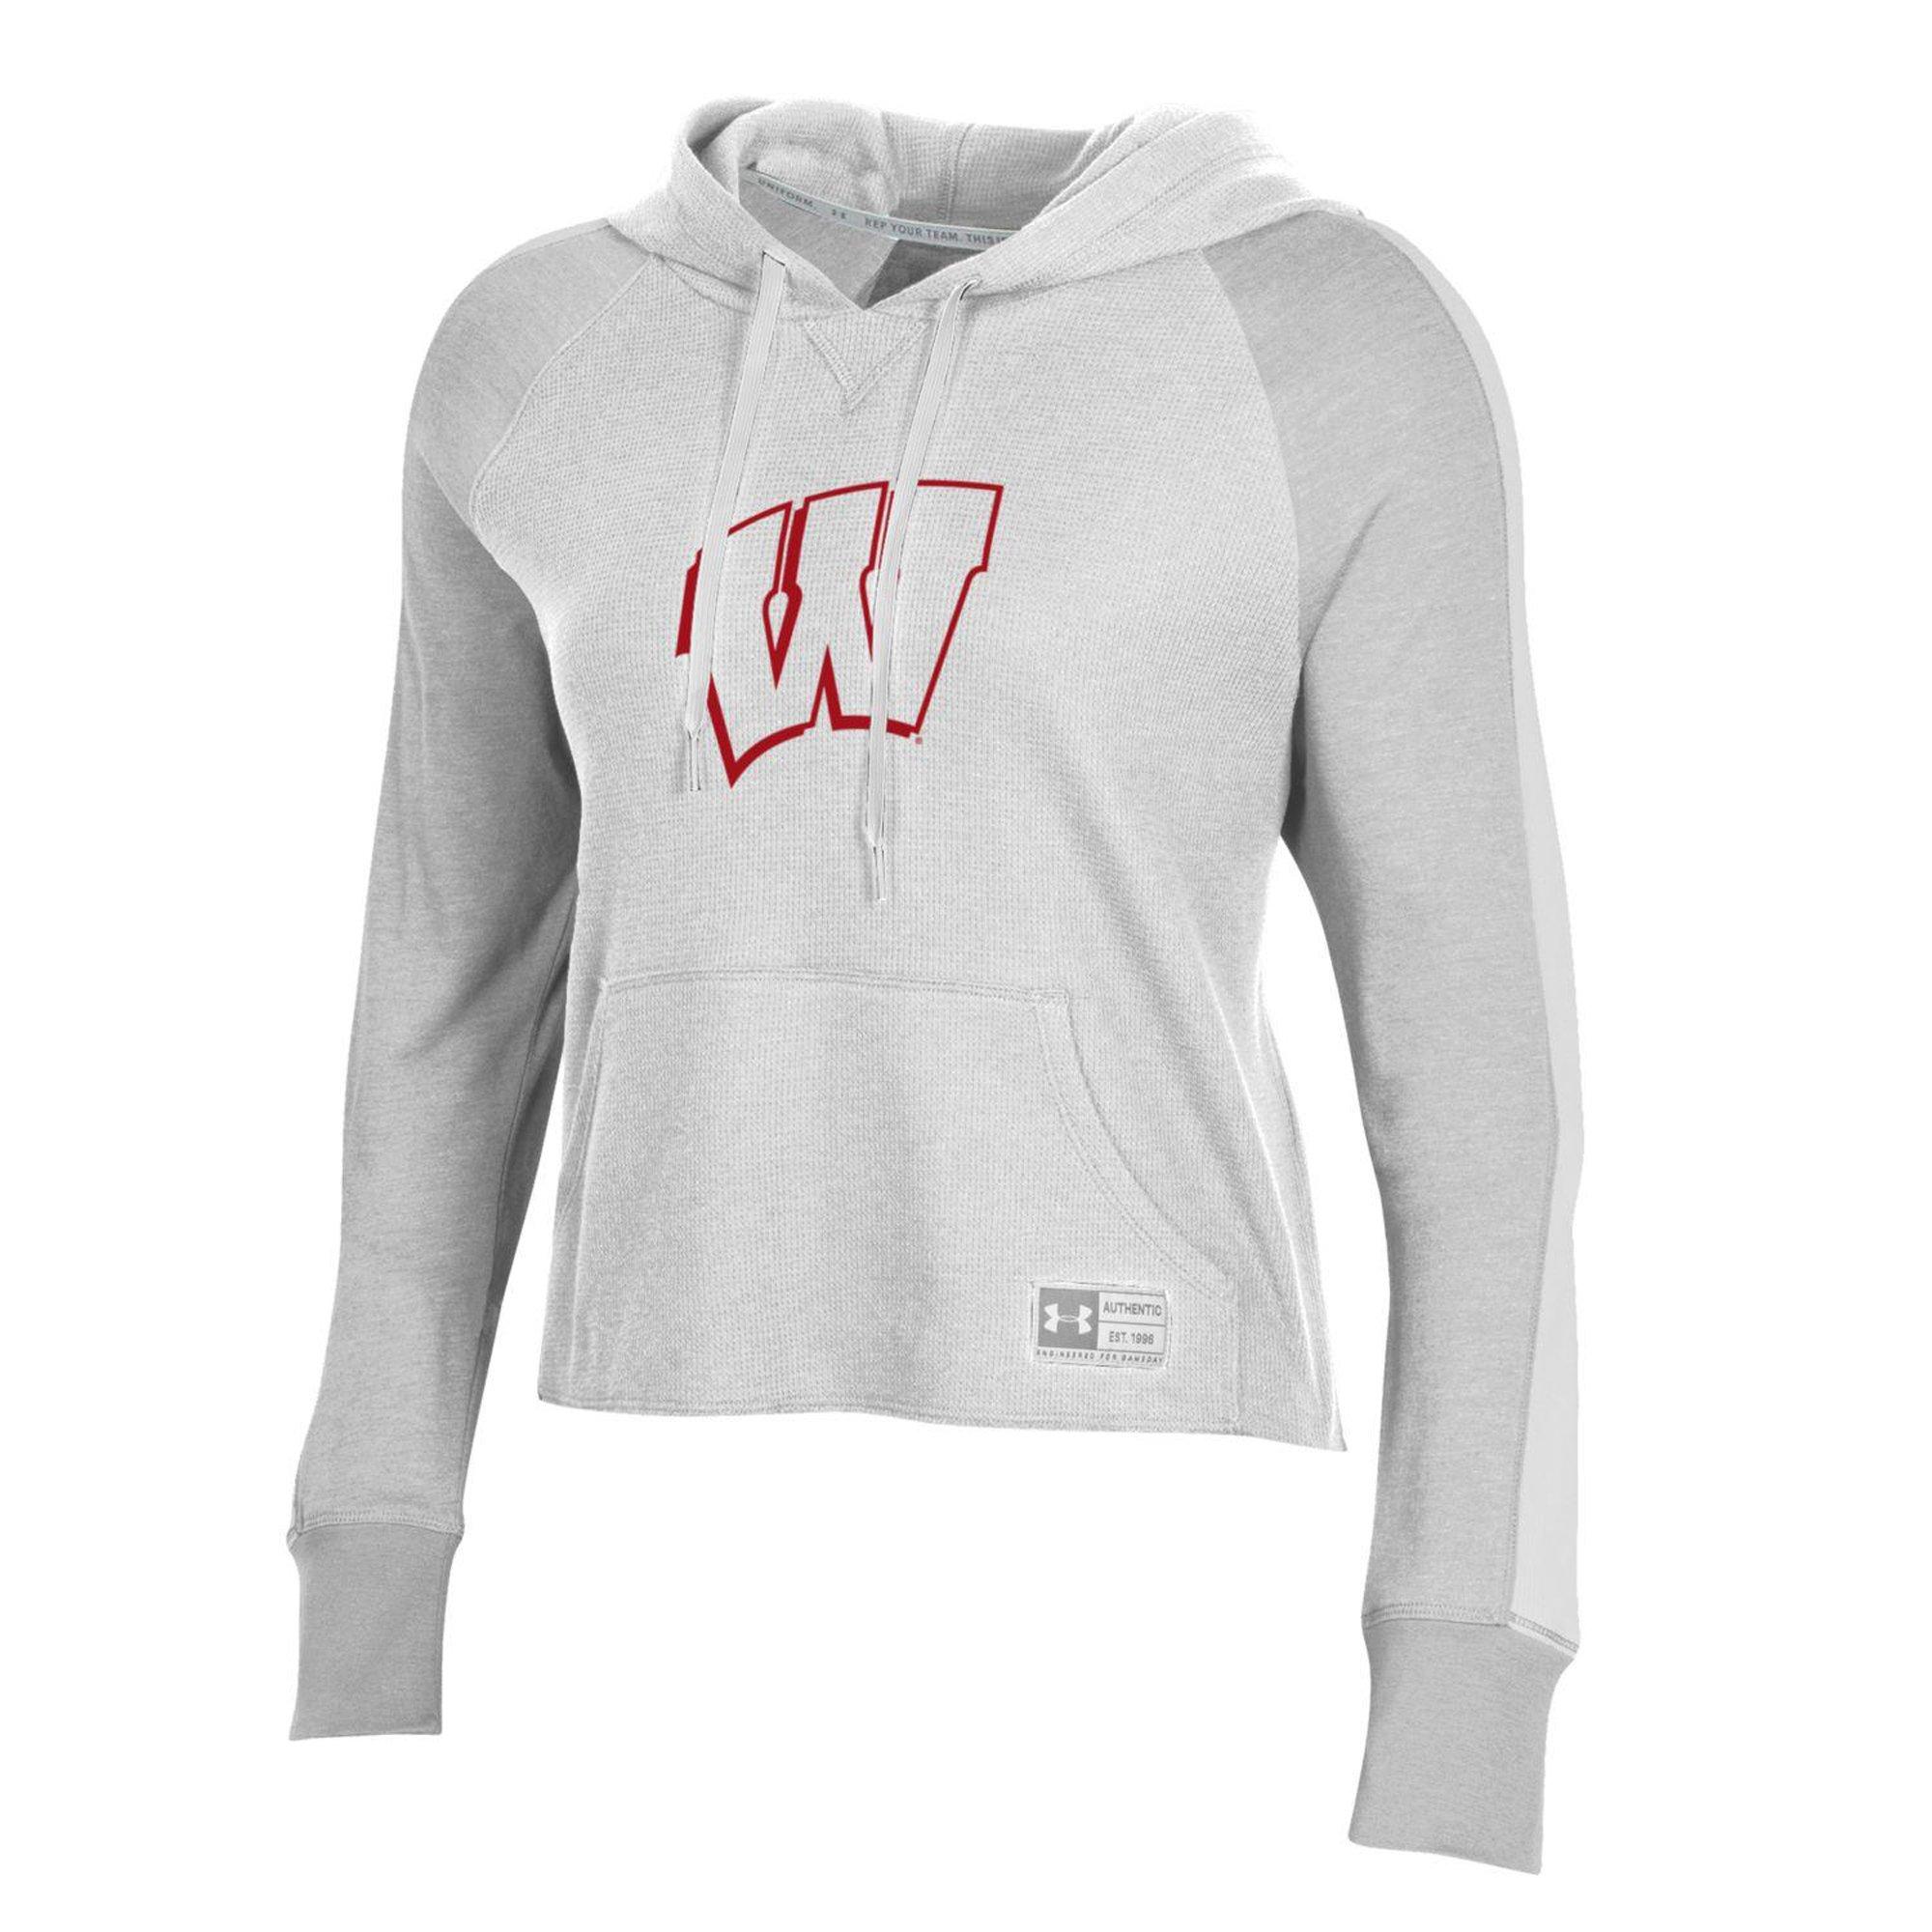 under armour women's waffle hoodie